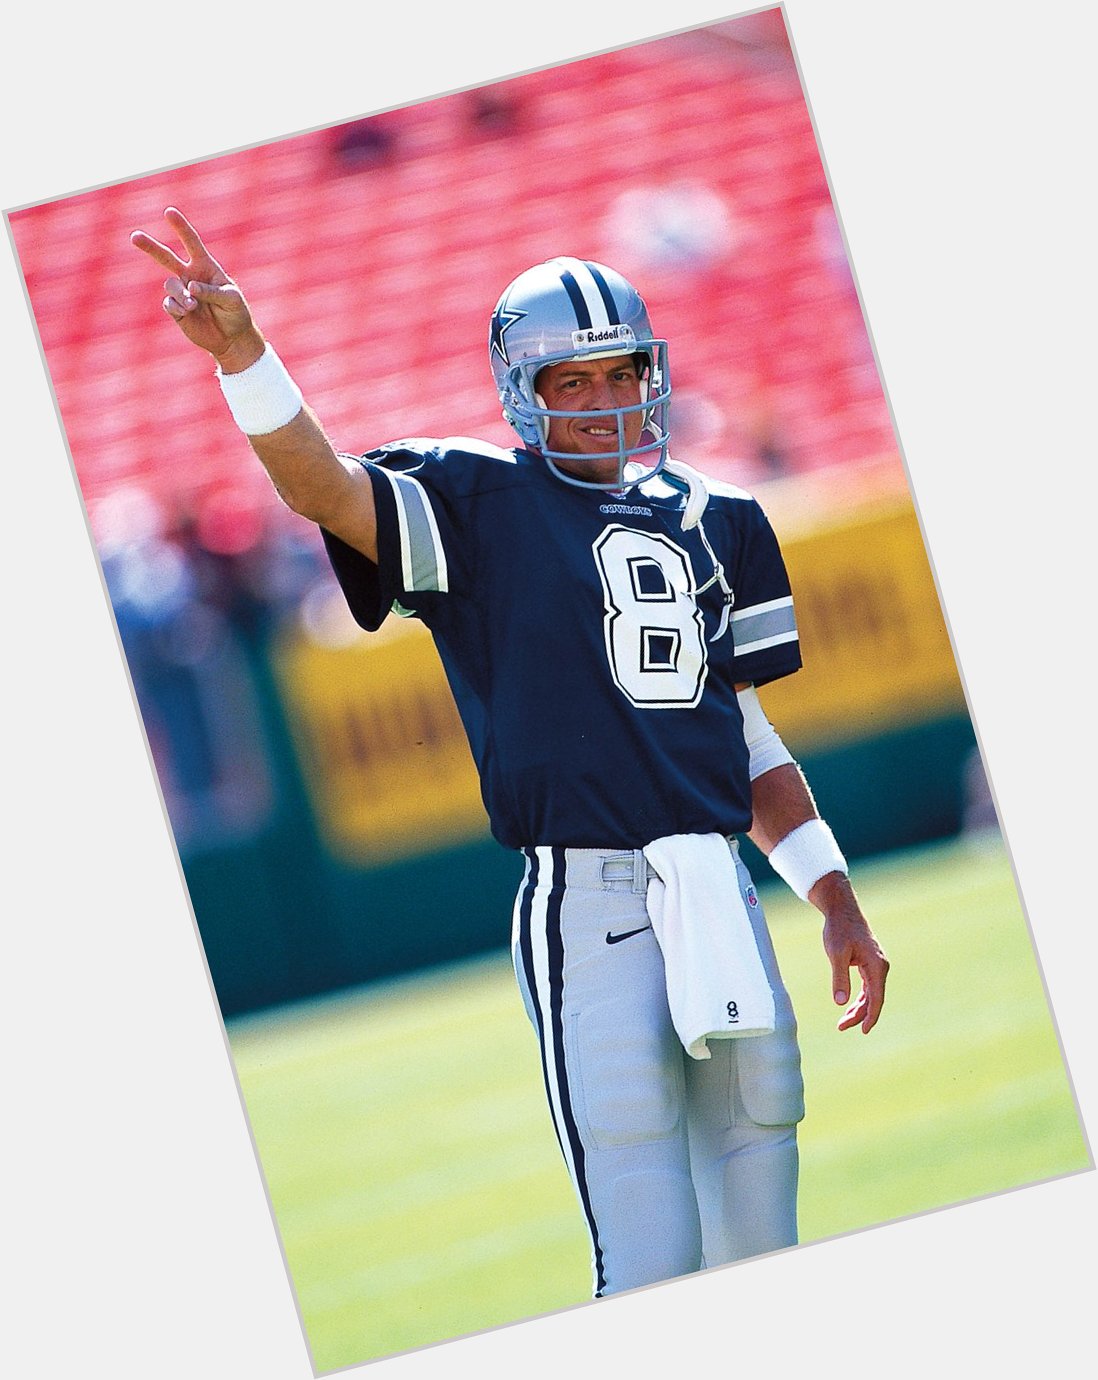 Happy Birthday to one of the greatest to ever wear the star, Troy Aikman. 